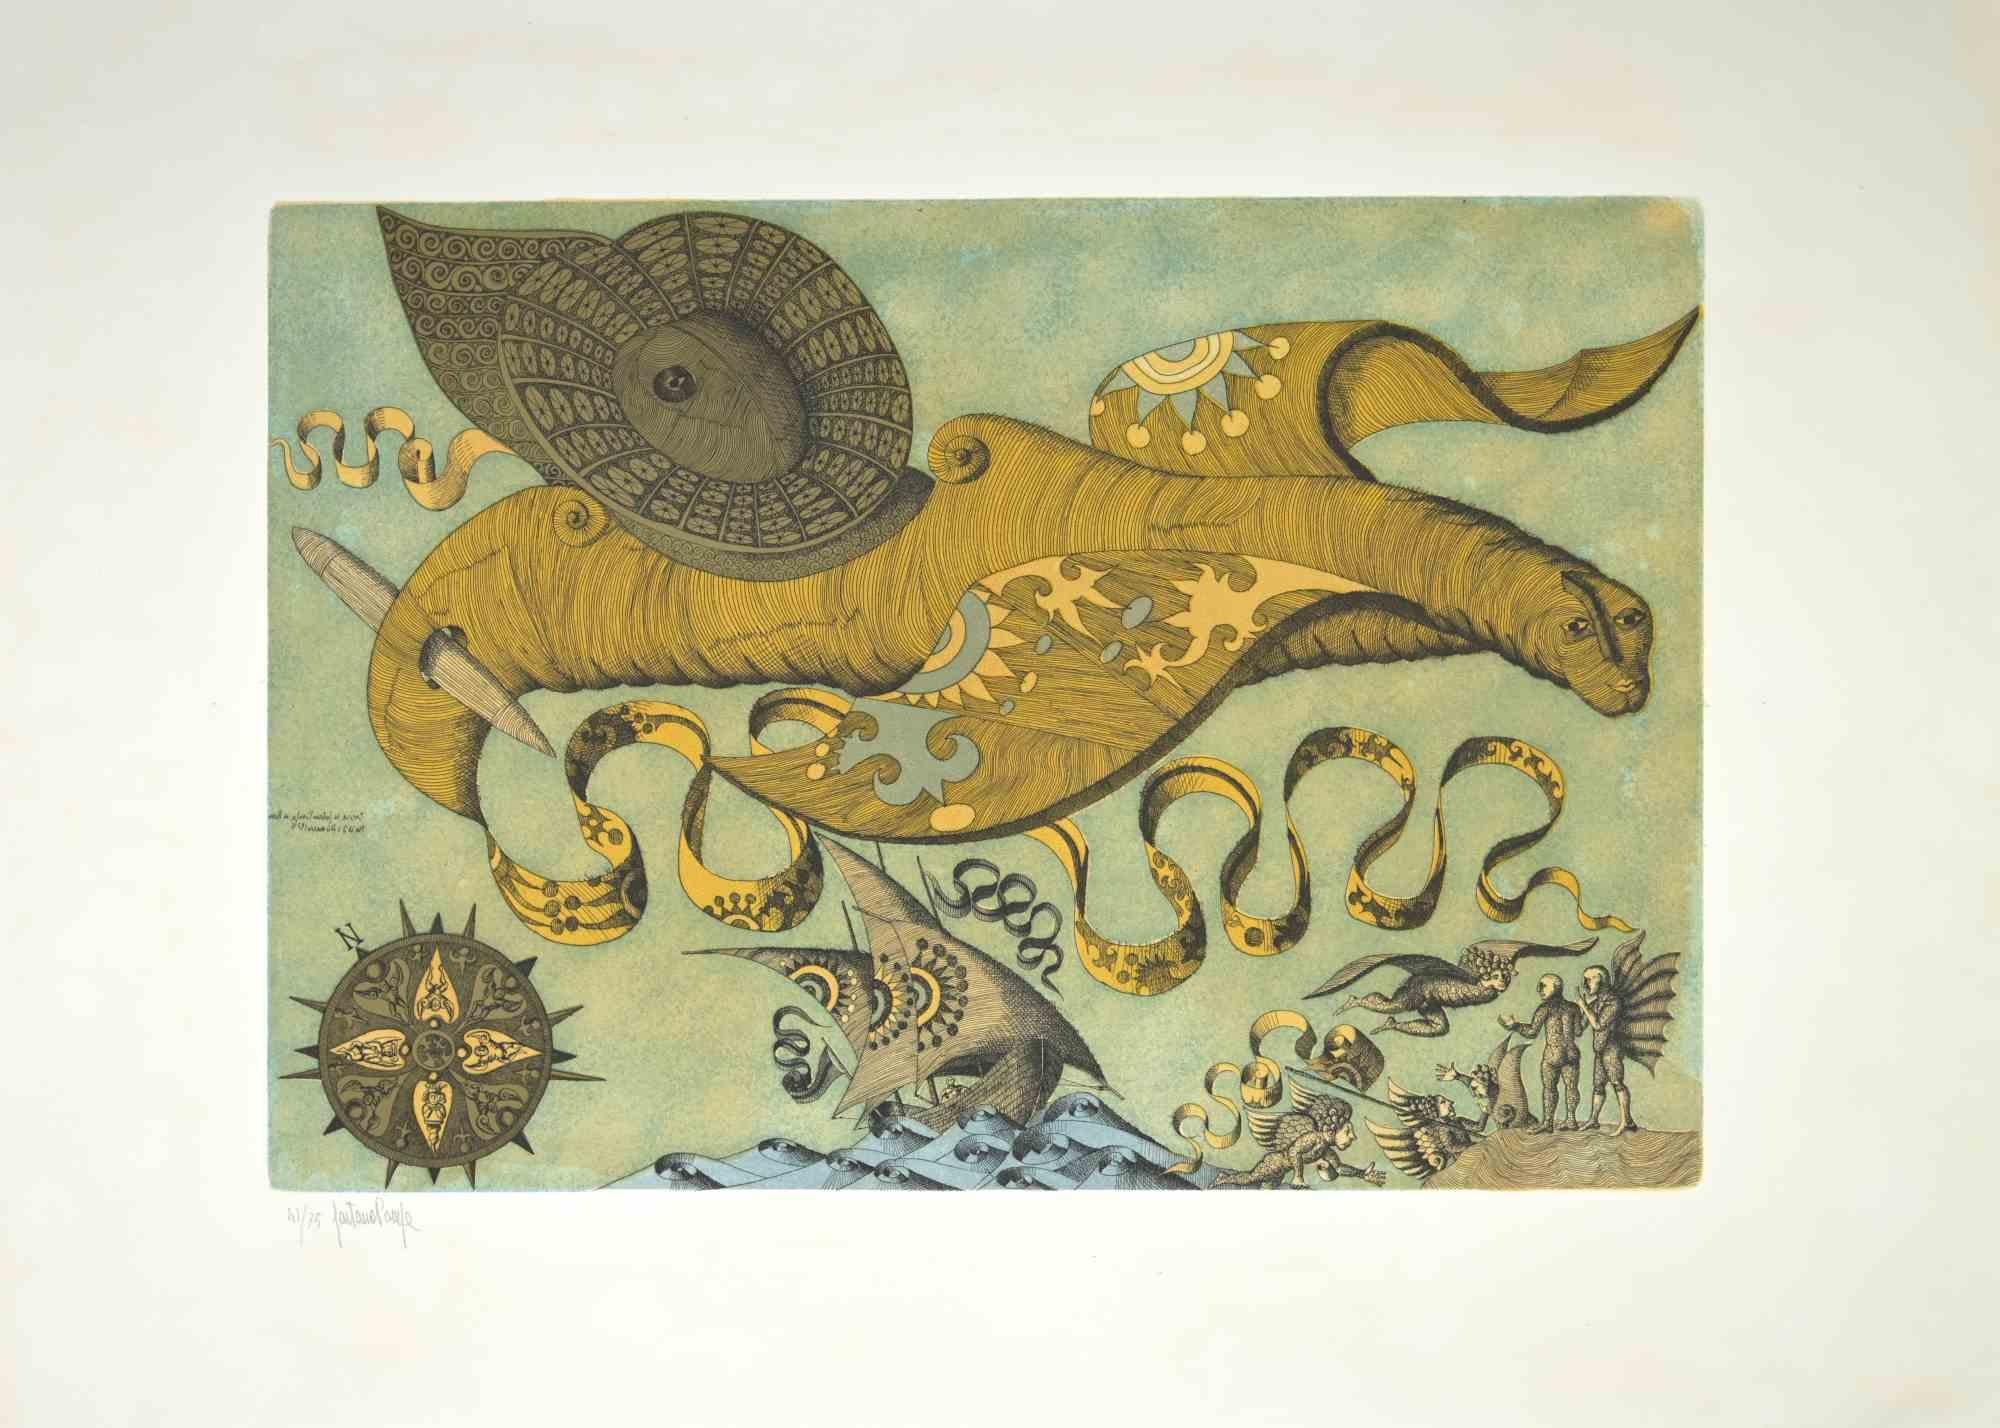 The Imaginary Animalis an artwork realized by Gaetano Pompa (1933, Forenza- 1998) in 1970s.

The artwork is  an aquatint and etching on paper.

Hand signed on the left corner. Edition of 75, numbered, 41. 

Excellent condition.

Gaetano Pompa  was